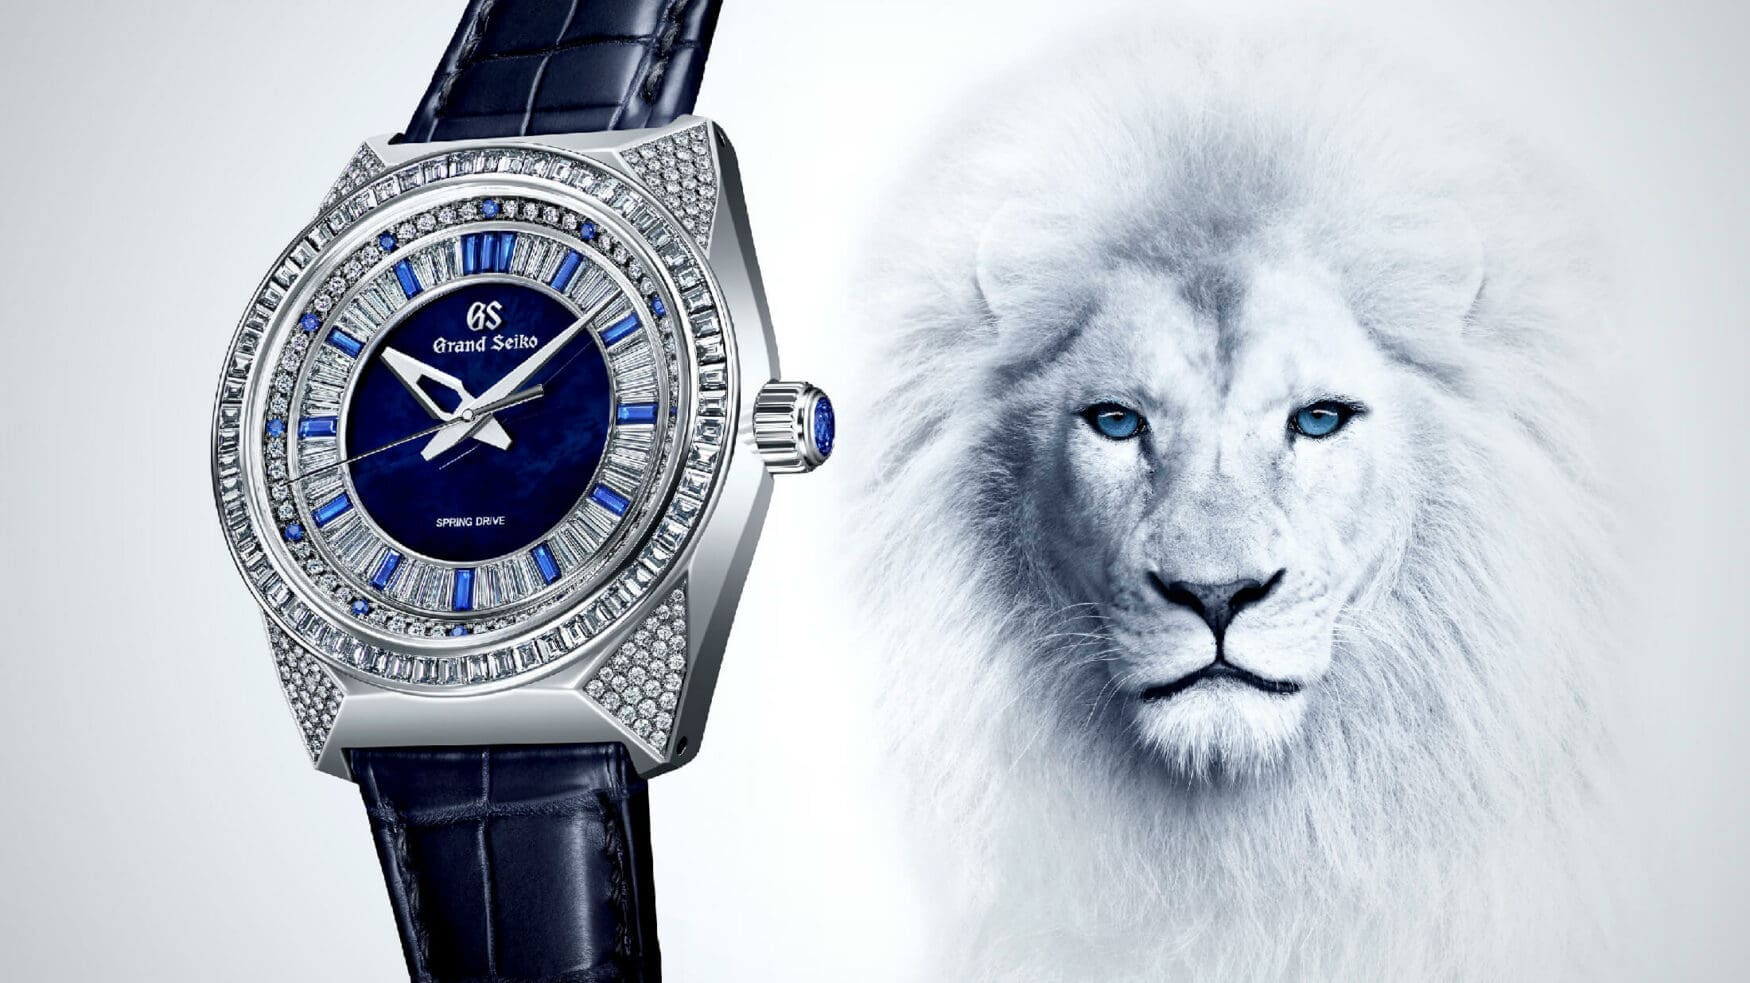 The Grand Seiko SBGD213 roars with hand-set diamonds and blue sapphires